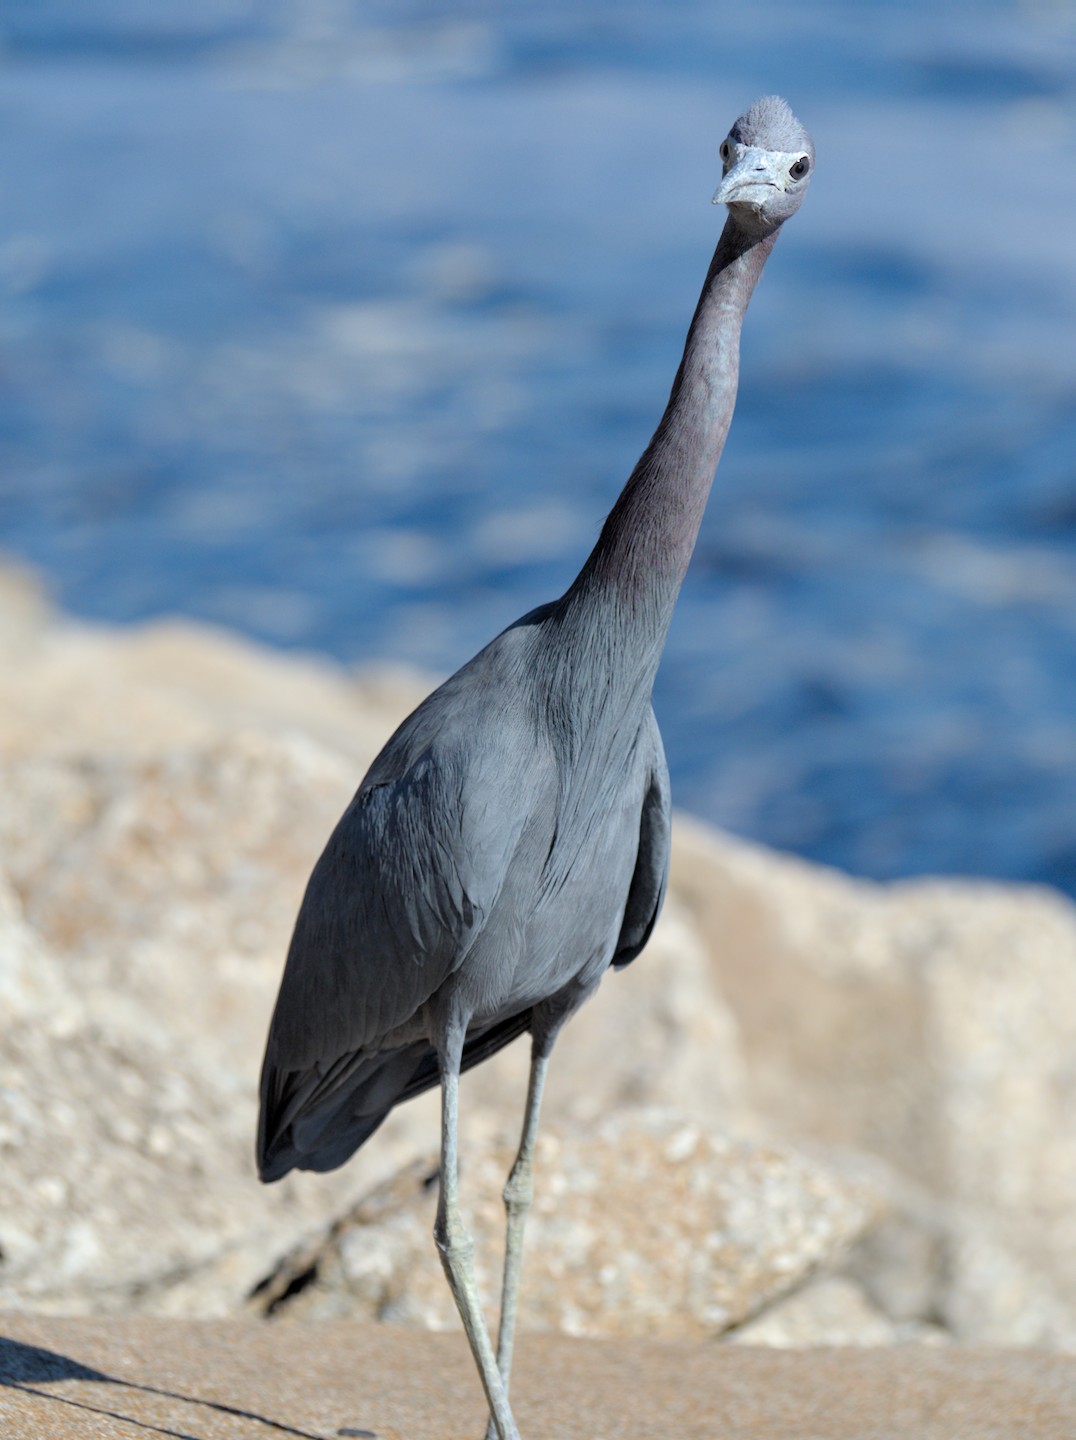 A little blue heron stands tall, looking into the camera with a river in the background